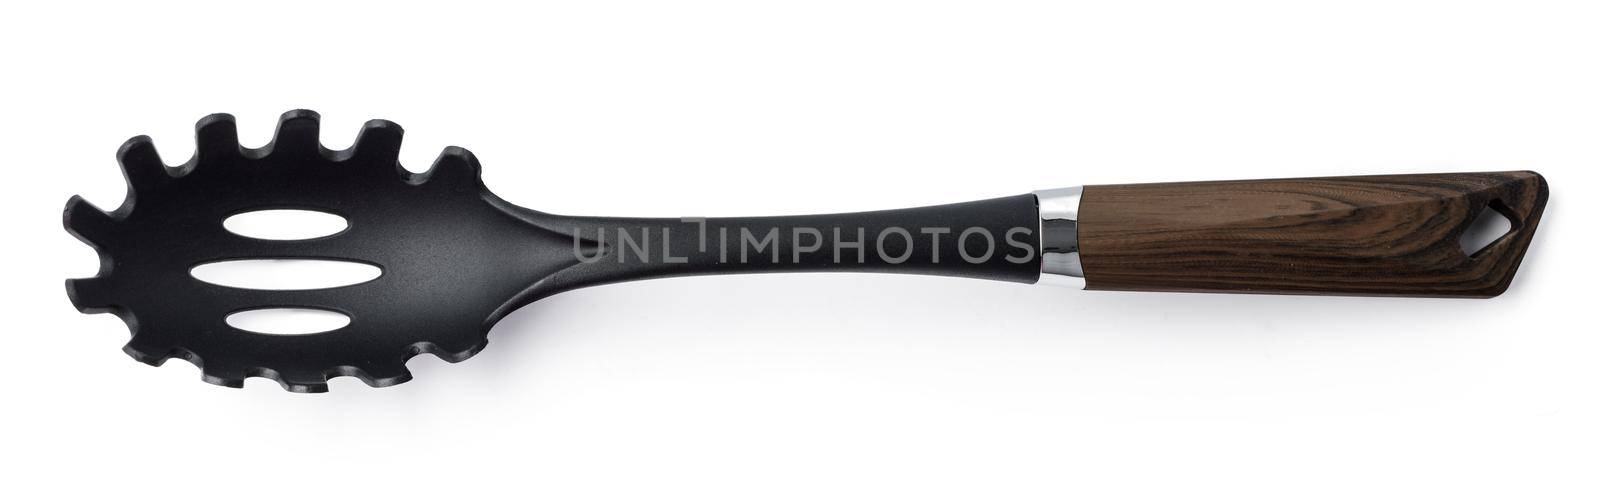 Black plastic spoon for draining on white background by Fabrikasimf